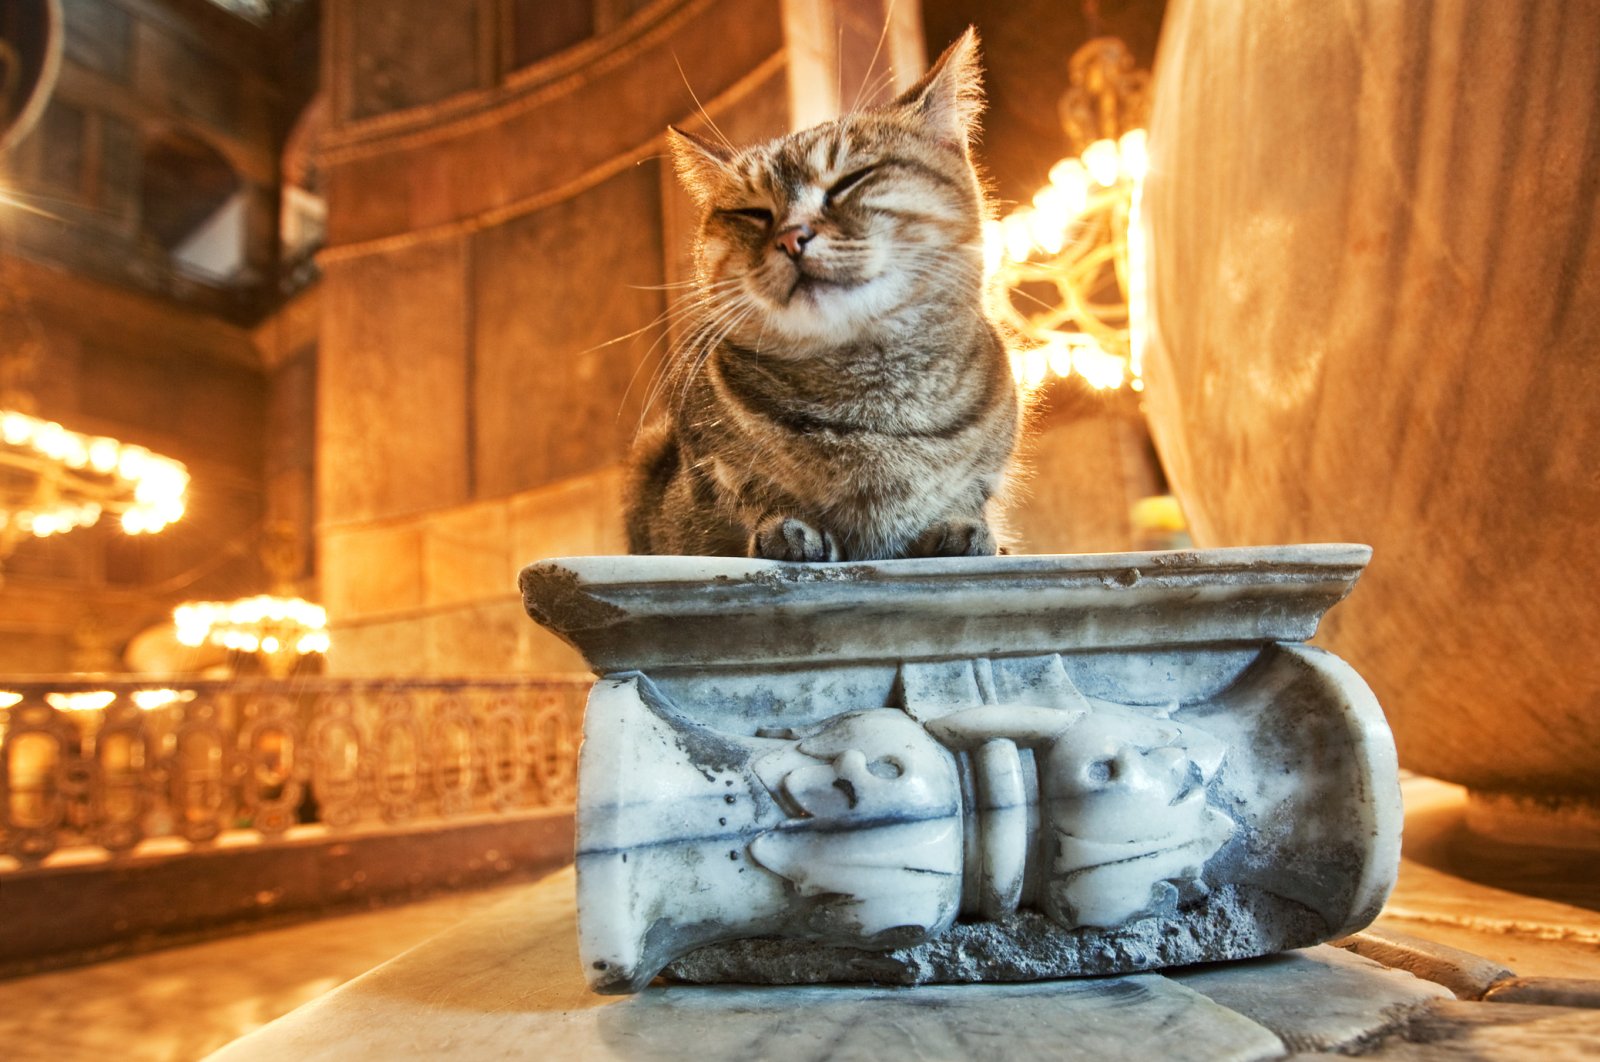 Like this cat that frequents Hagia Sophia, strays have always been welcomed in Istanbul. (iStock Photo)